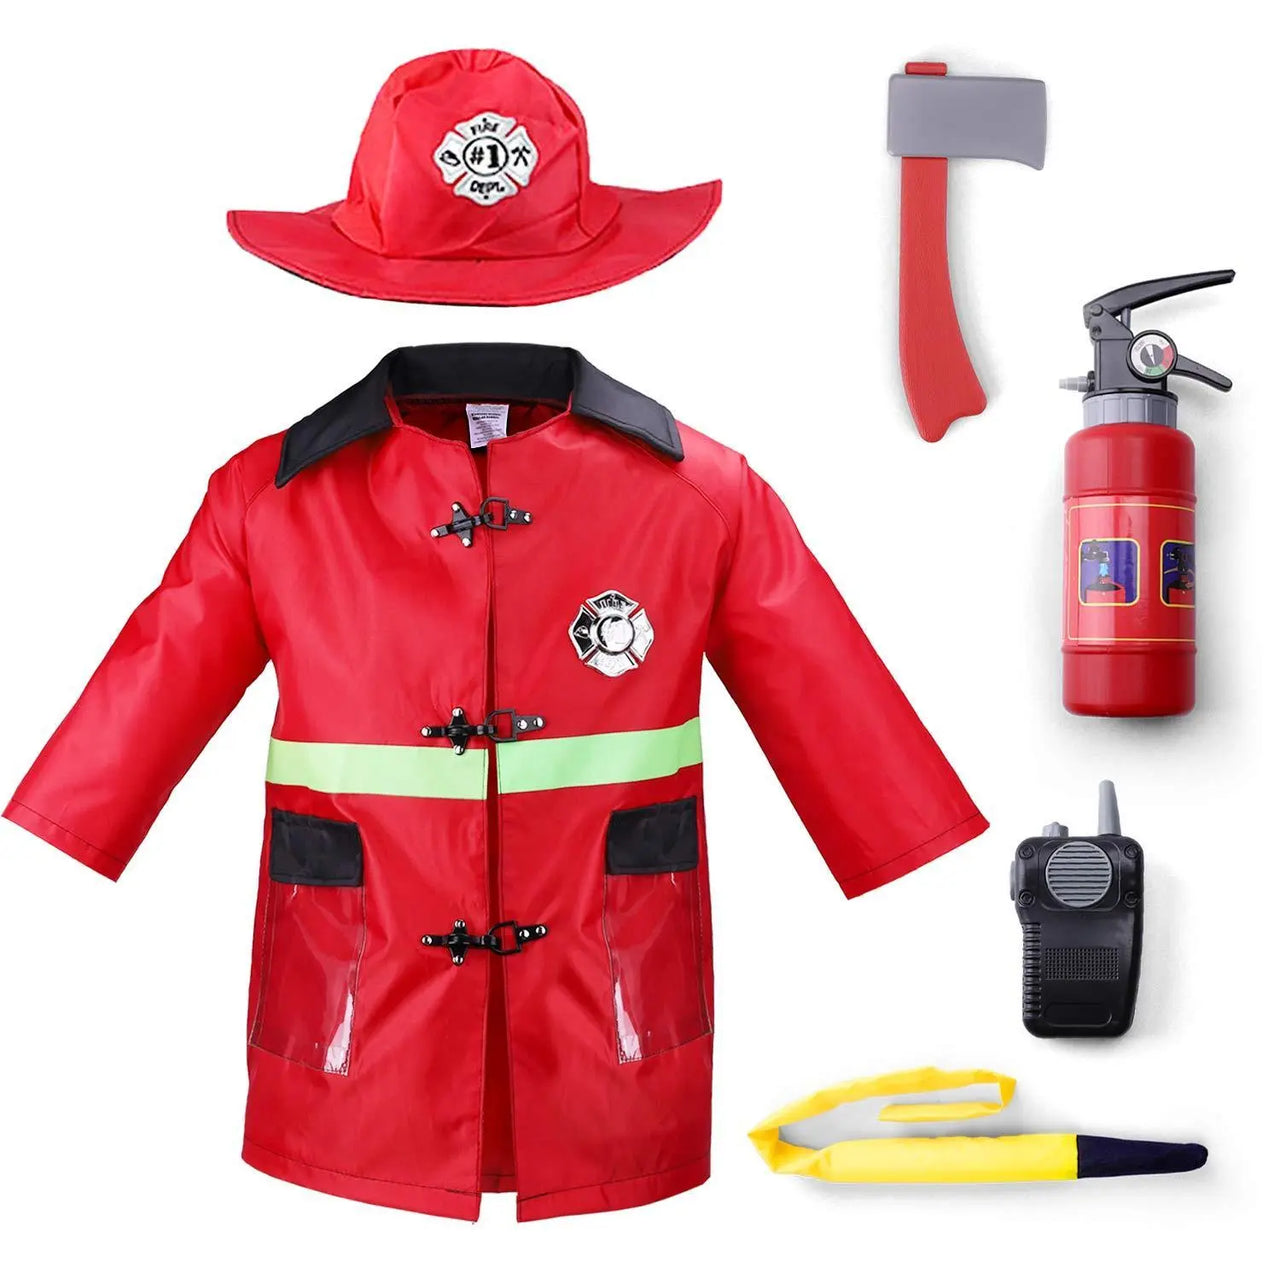 Fire Fighter Role Play Costume SetB